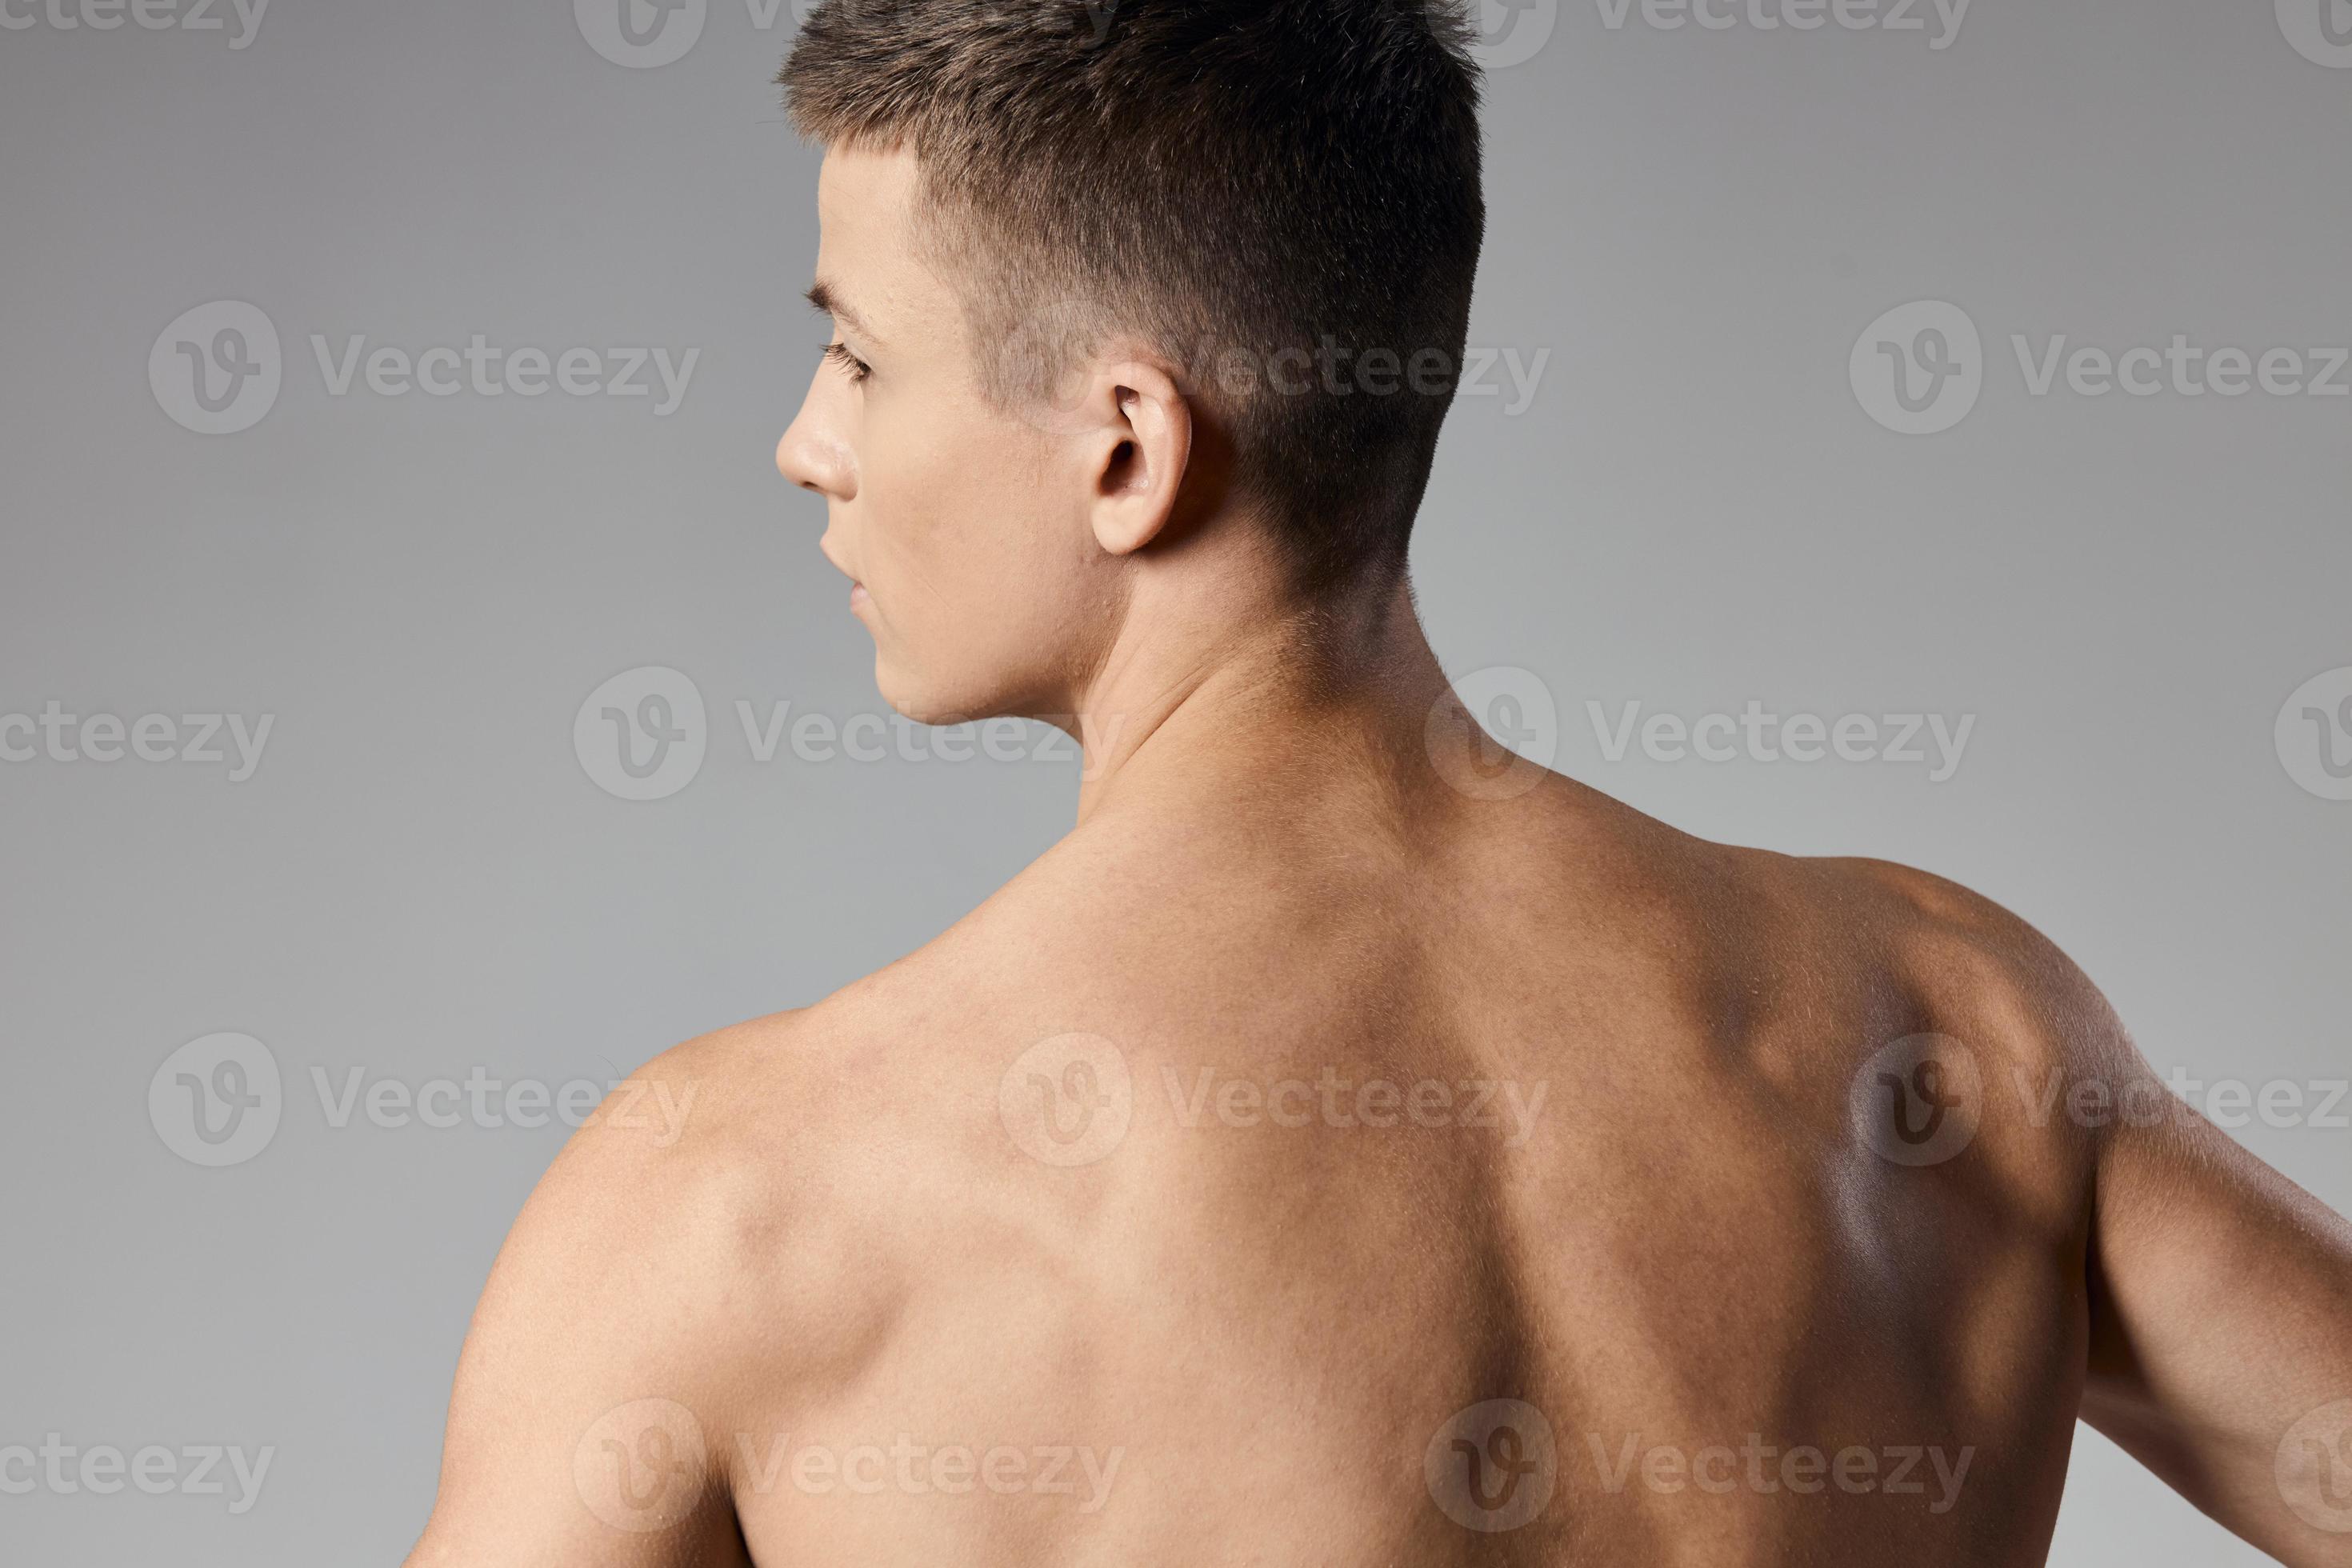 muscular backs side view